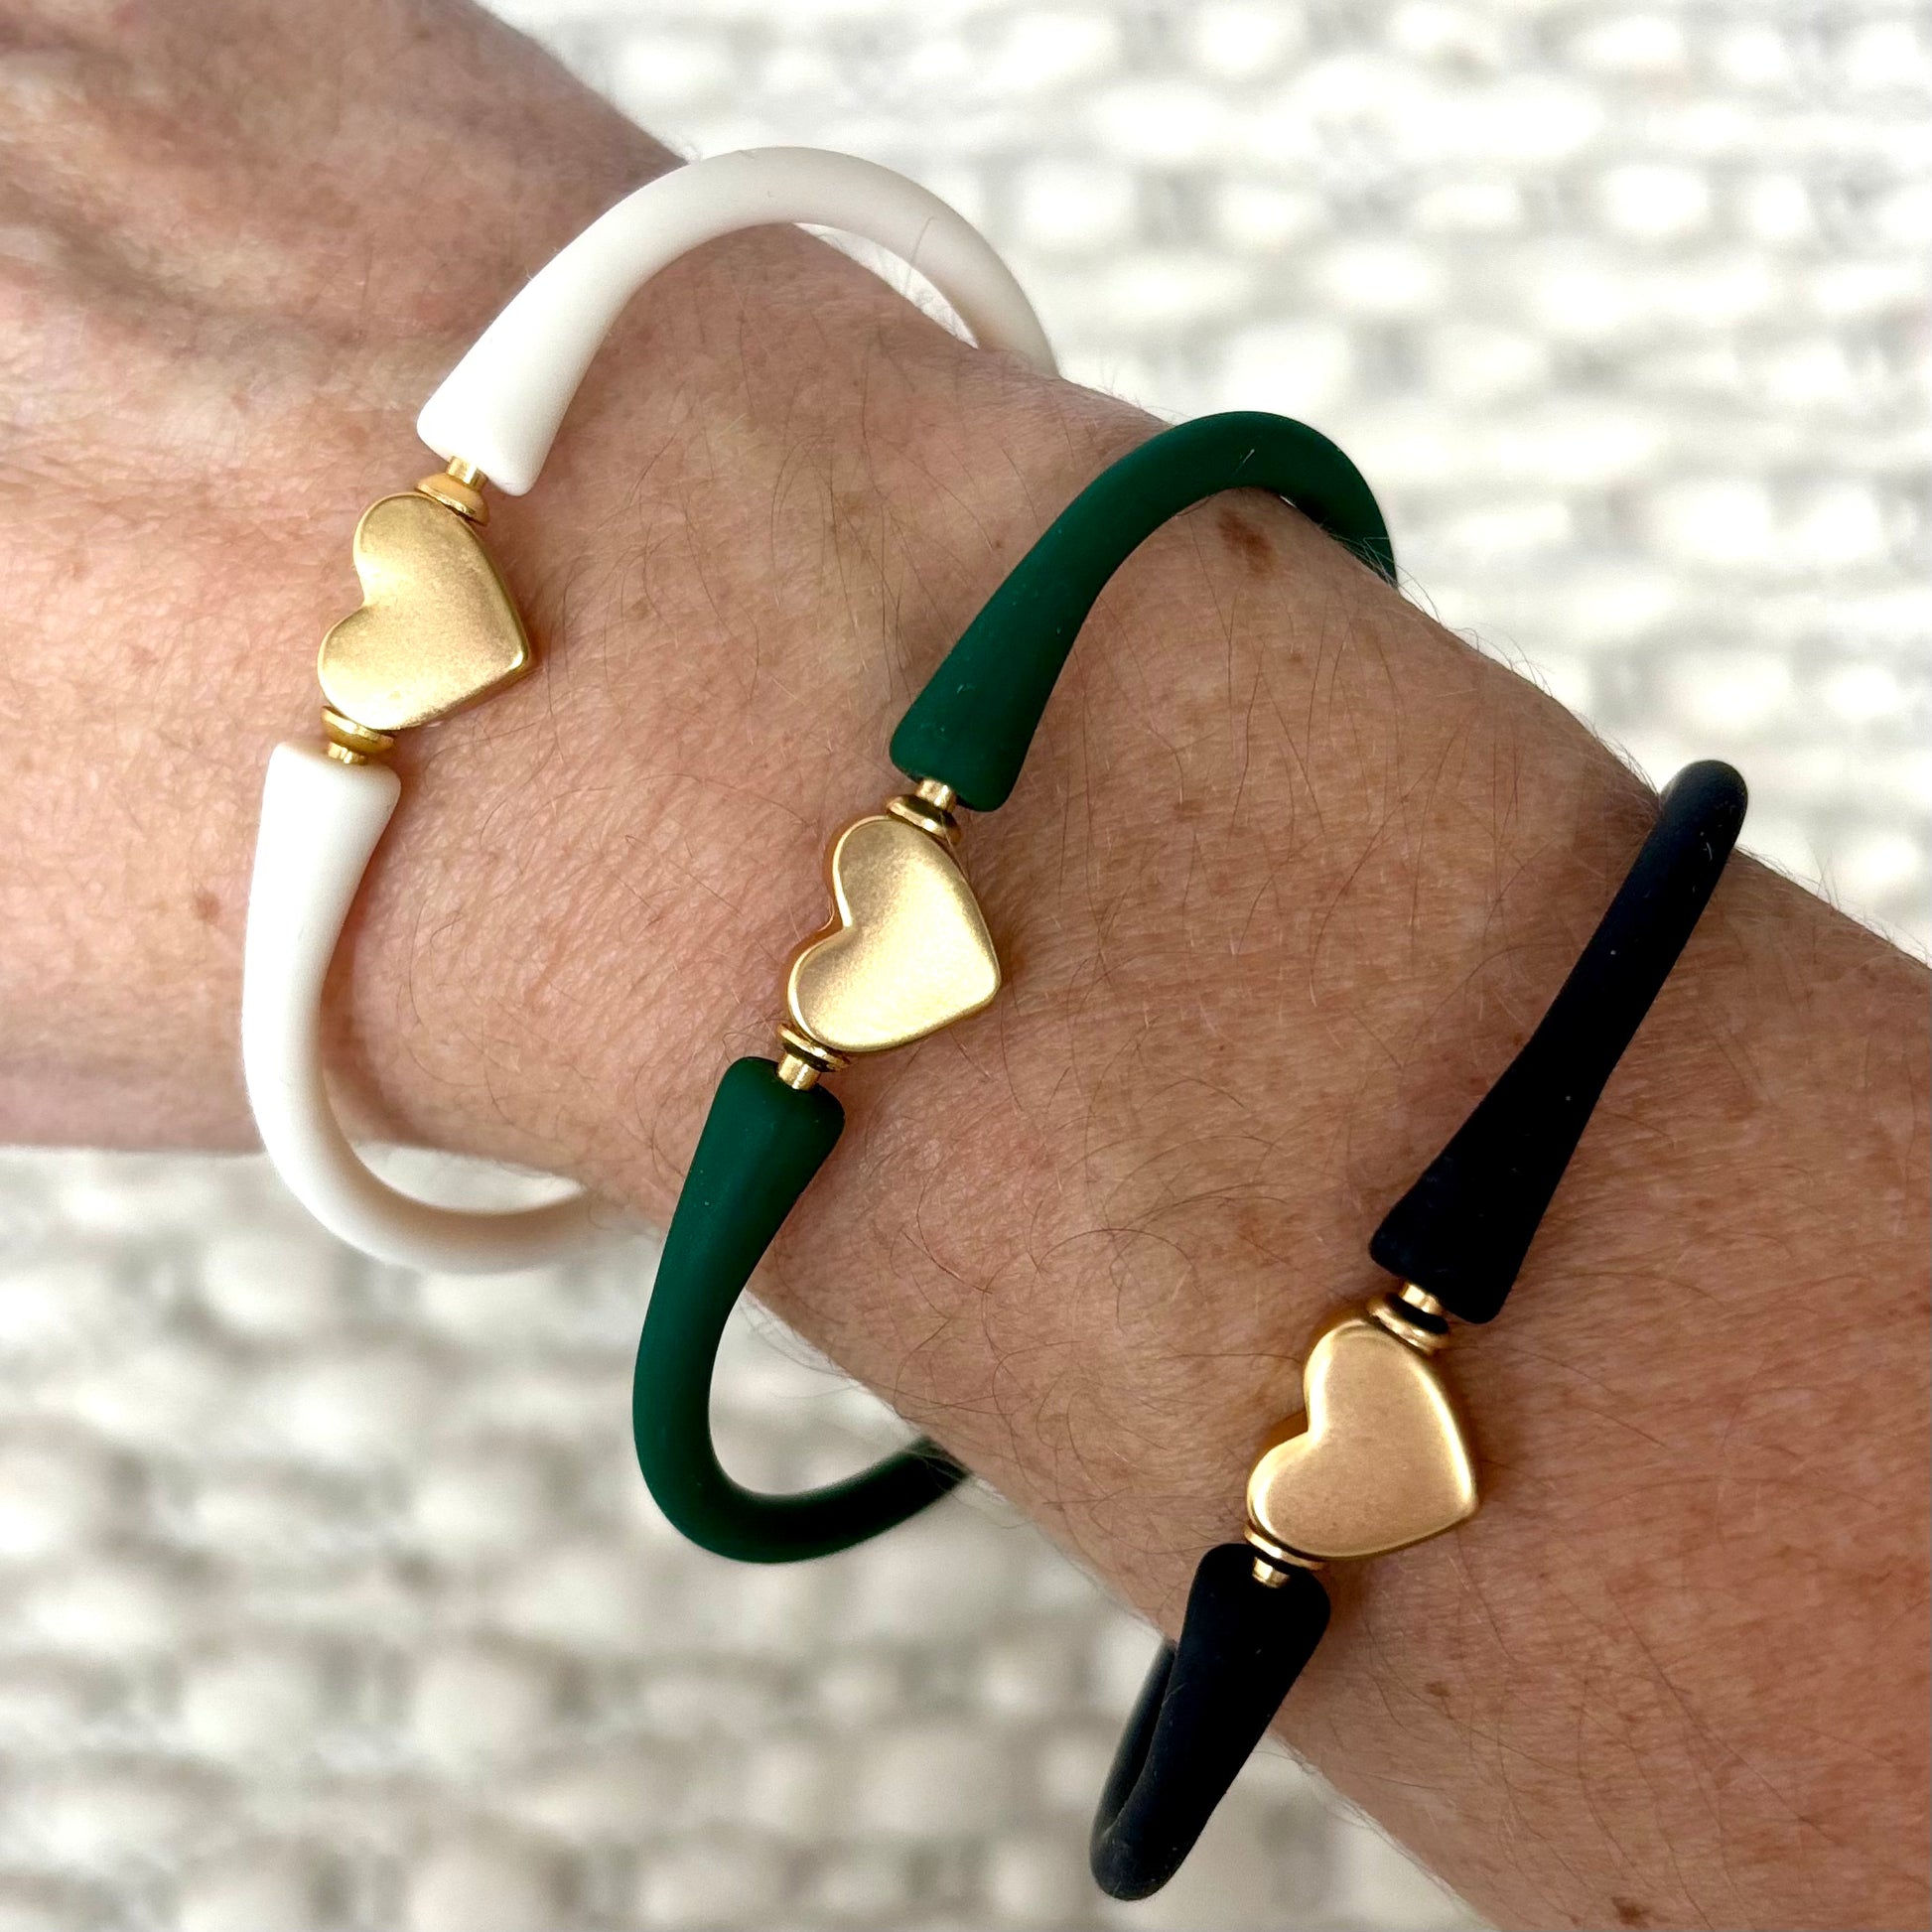 Gold heart charm with silicone band bracelet